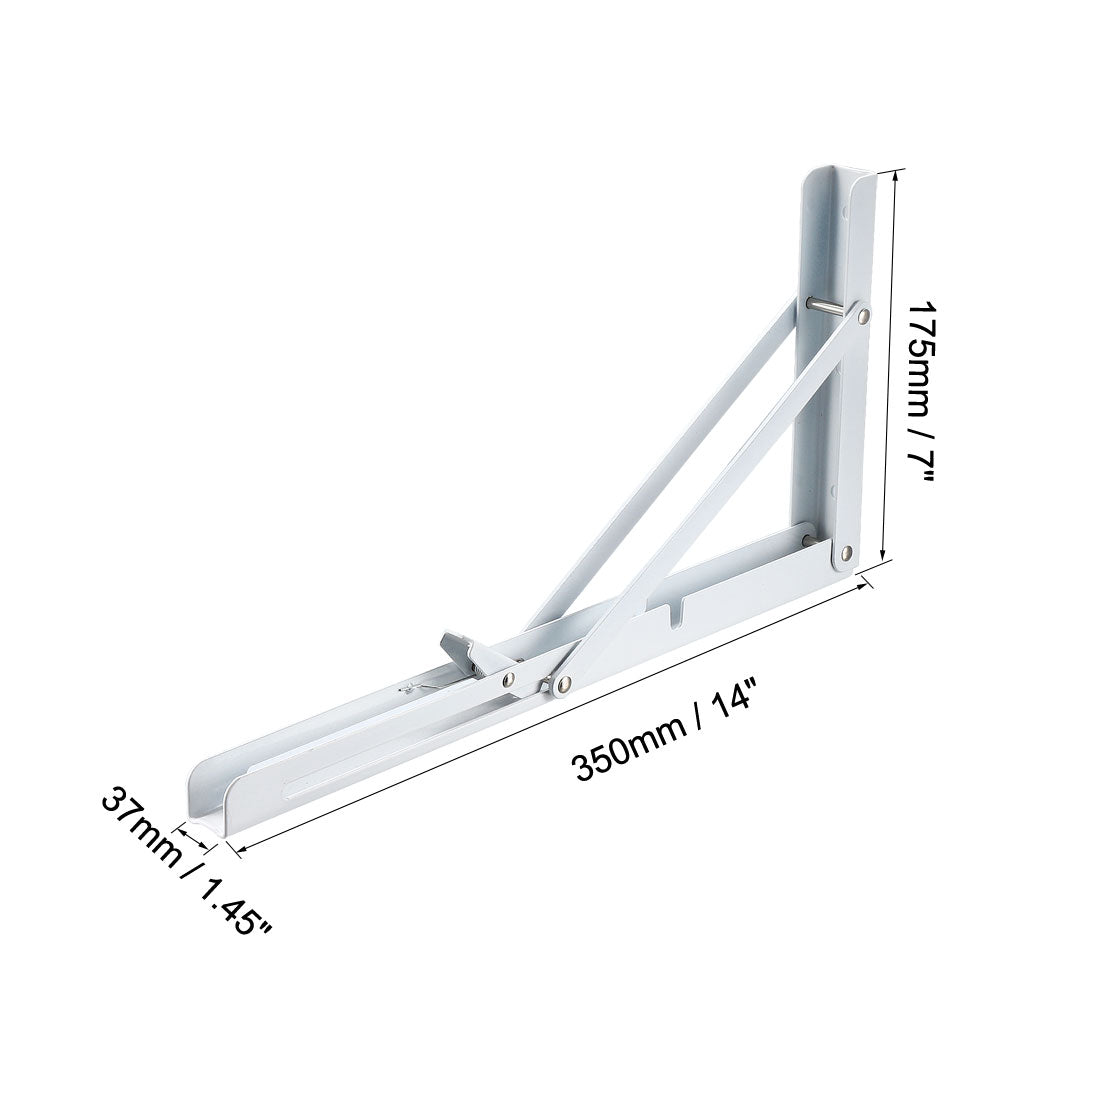 uxcell Uxcell Folding Bracket 14 inch 350mm for Shelf Table Desk Wall Mounted Support Collapsible Long Release Arm Space Saving Carbon Steel